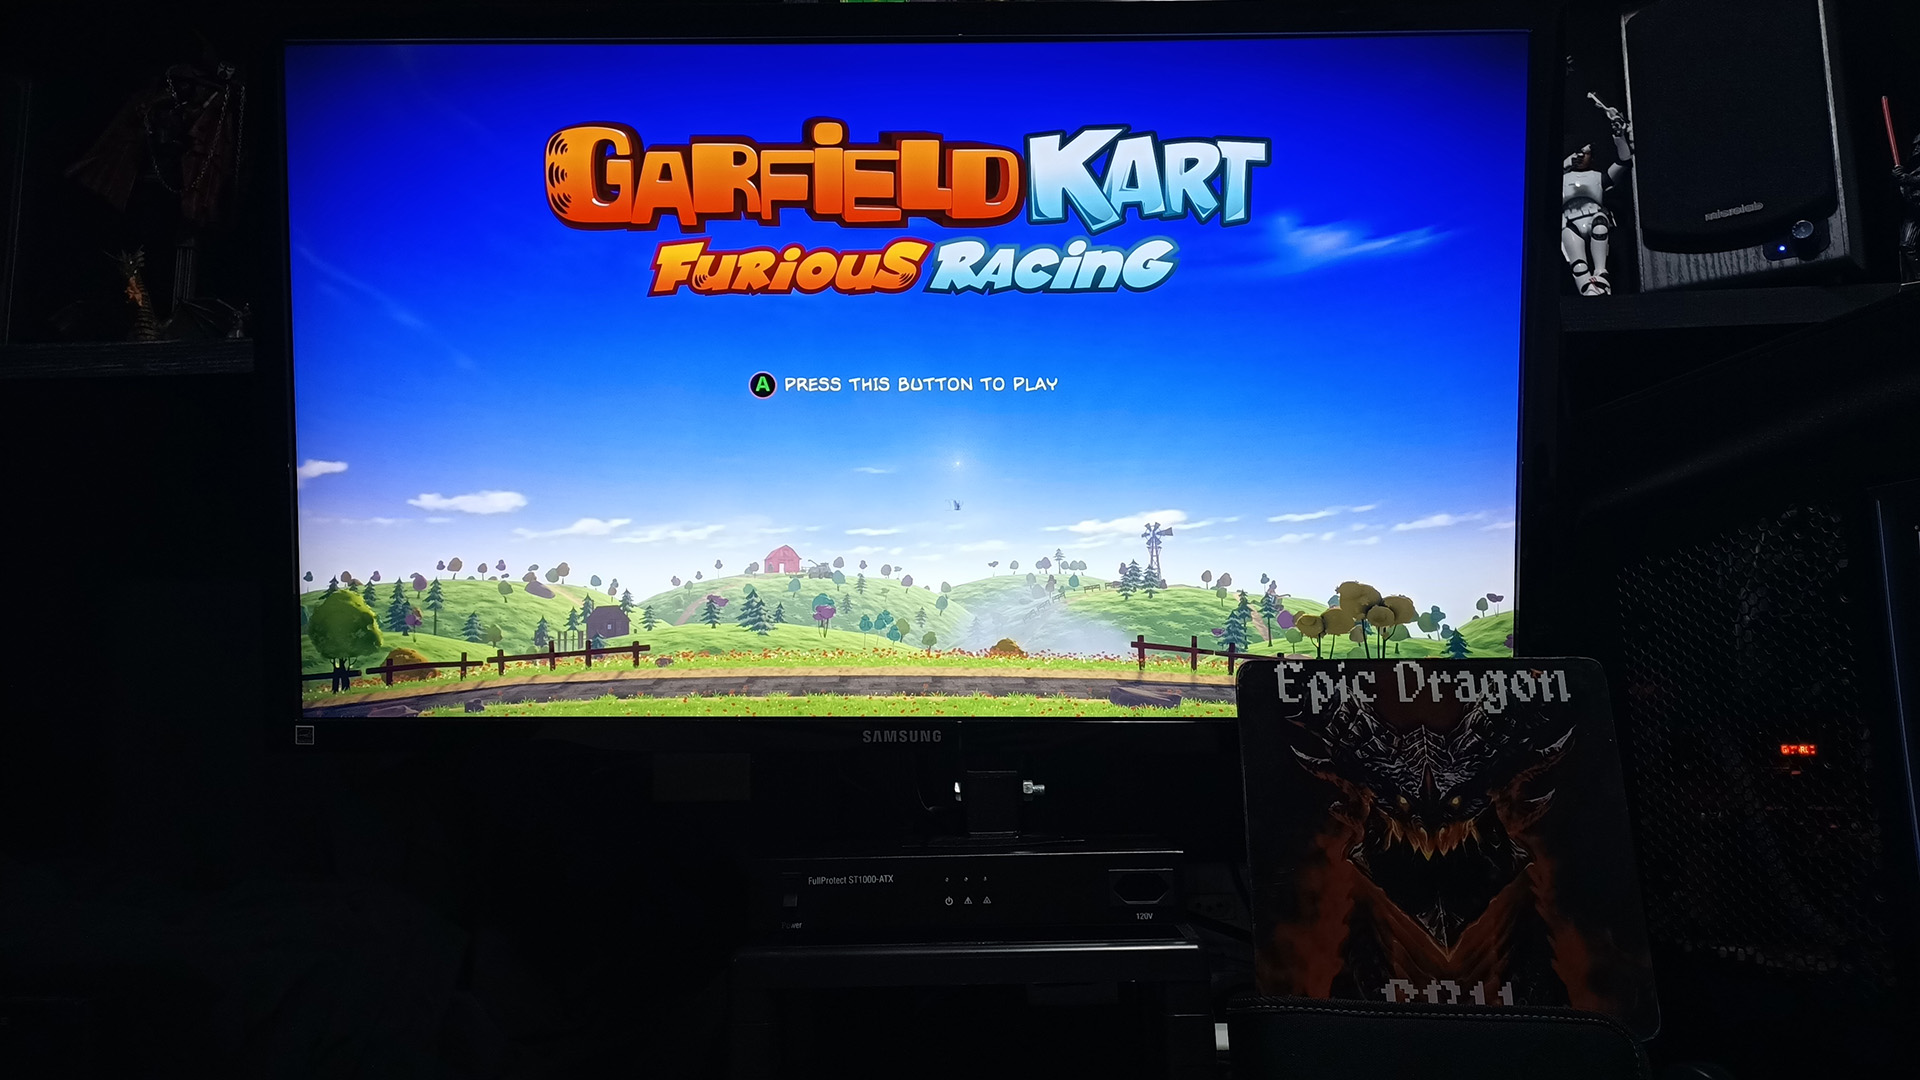 Garfield Kart Furious Racing: Valley Of The Kings [Time Trial: Lap Time] time of 0:00:53.019